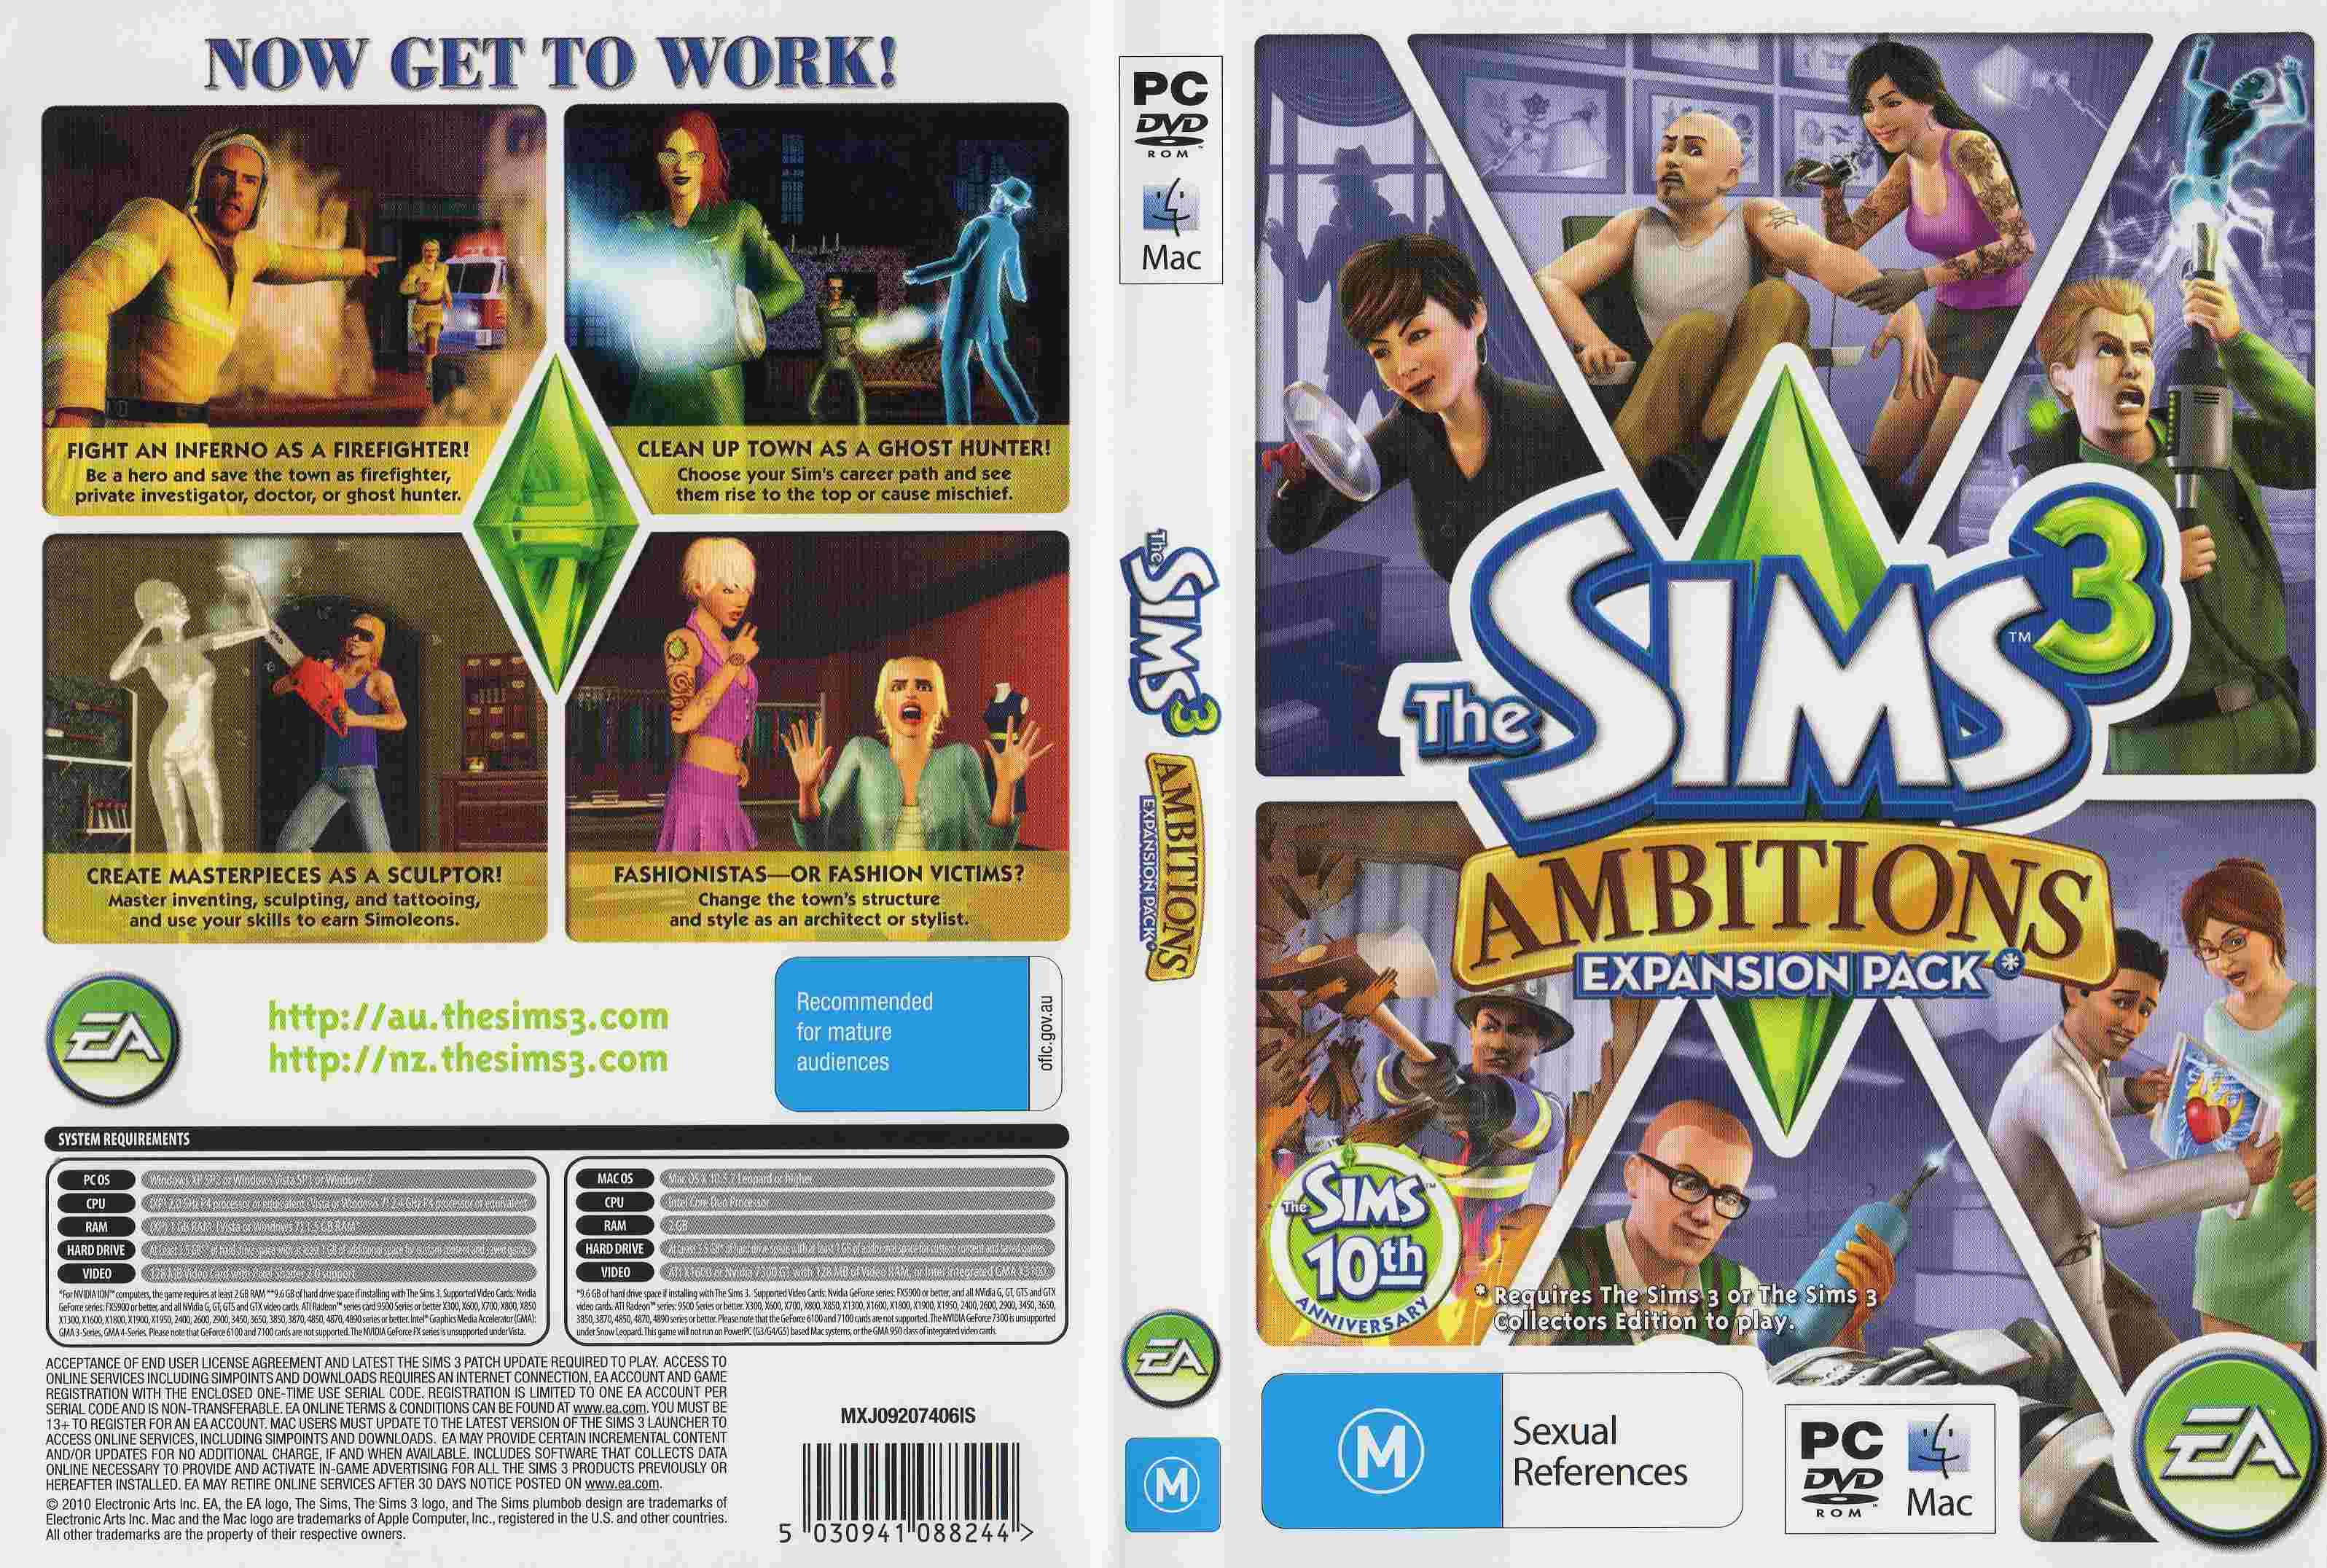 Диски игры симс. Симс 3 диск. Симс 3 карьера диск. SIMS 3 Cover. SIMS 3 Ambitions.